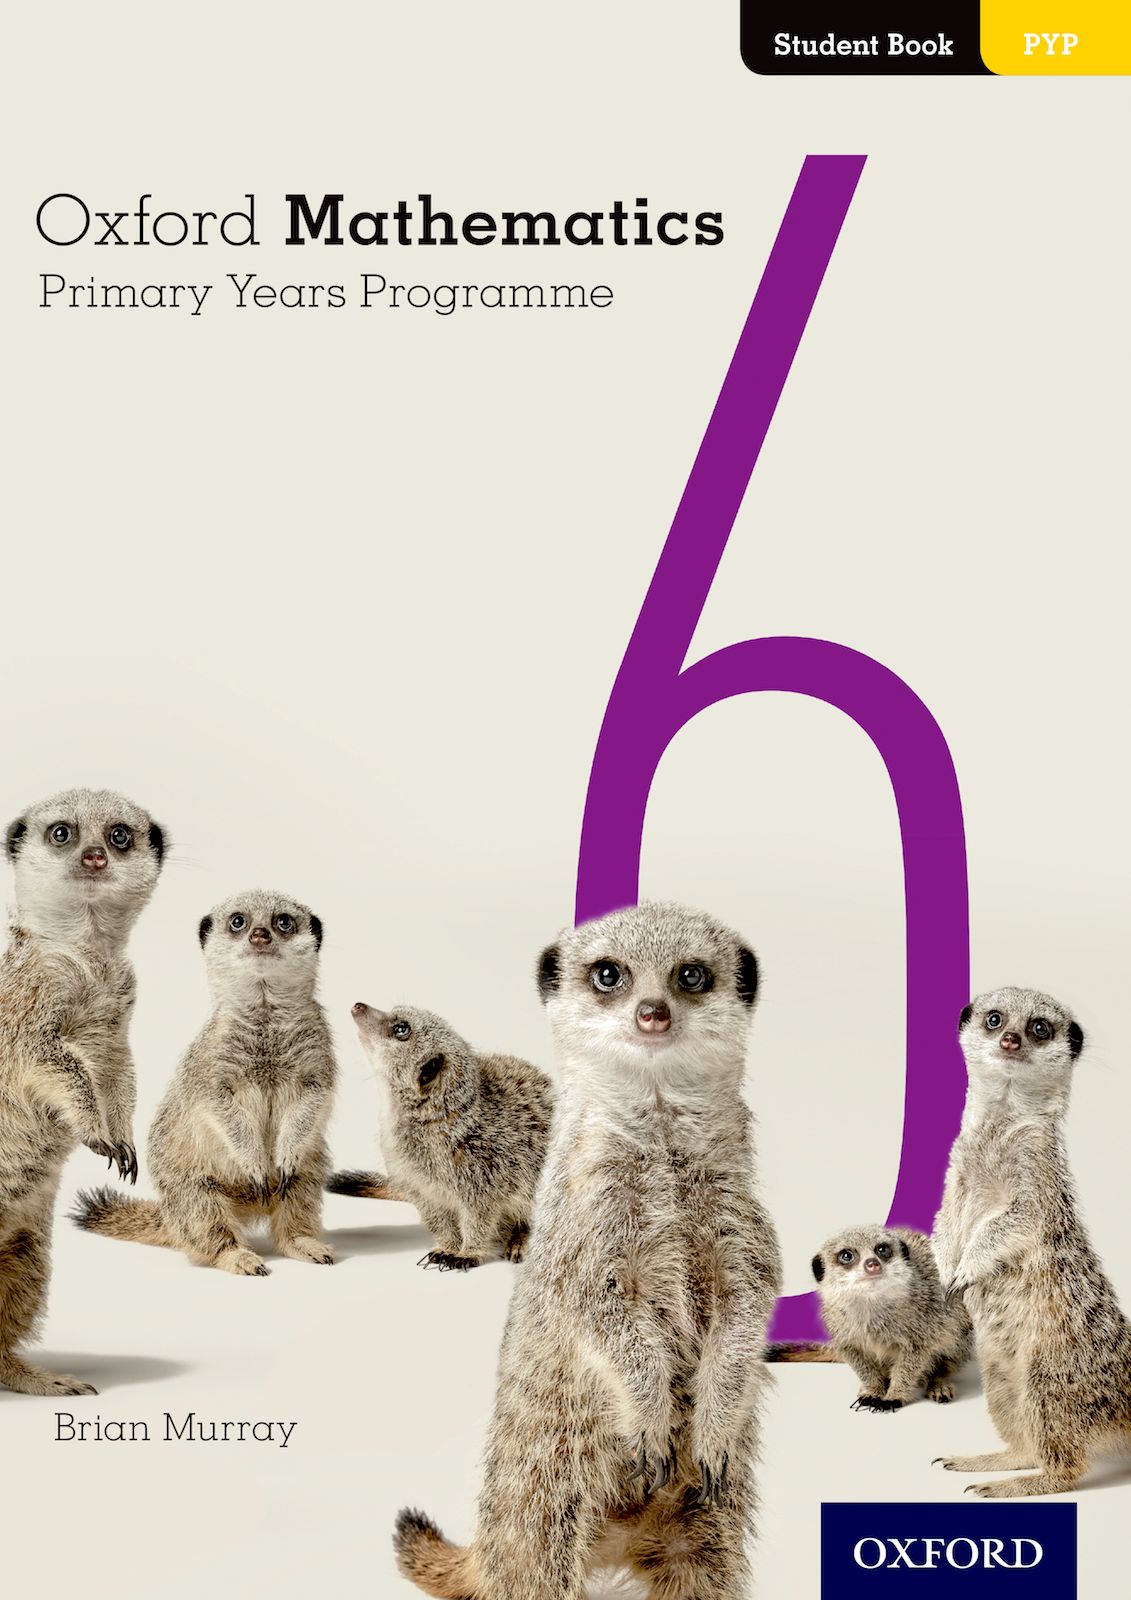 Featured image for “Oxford Mathematics Primary Years Programme Student Book 6”